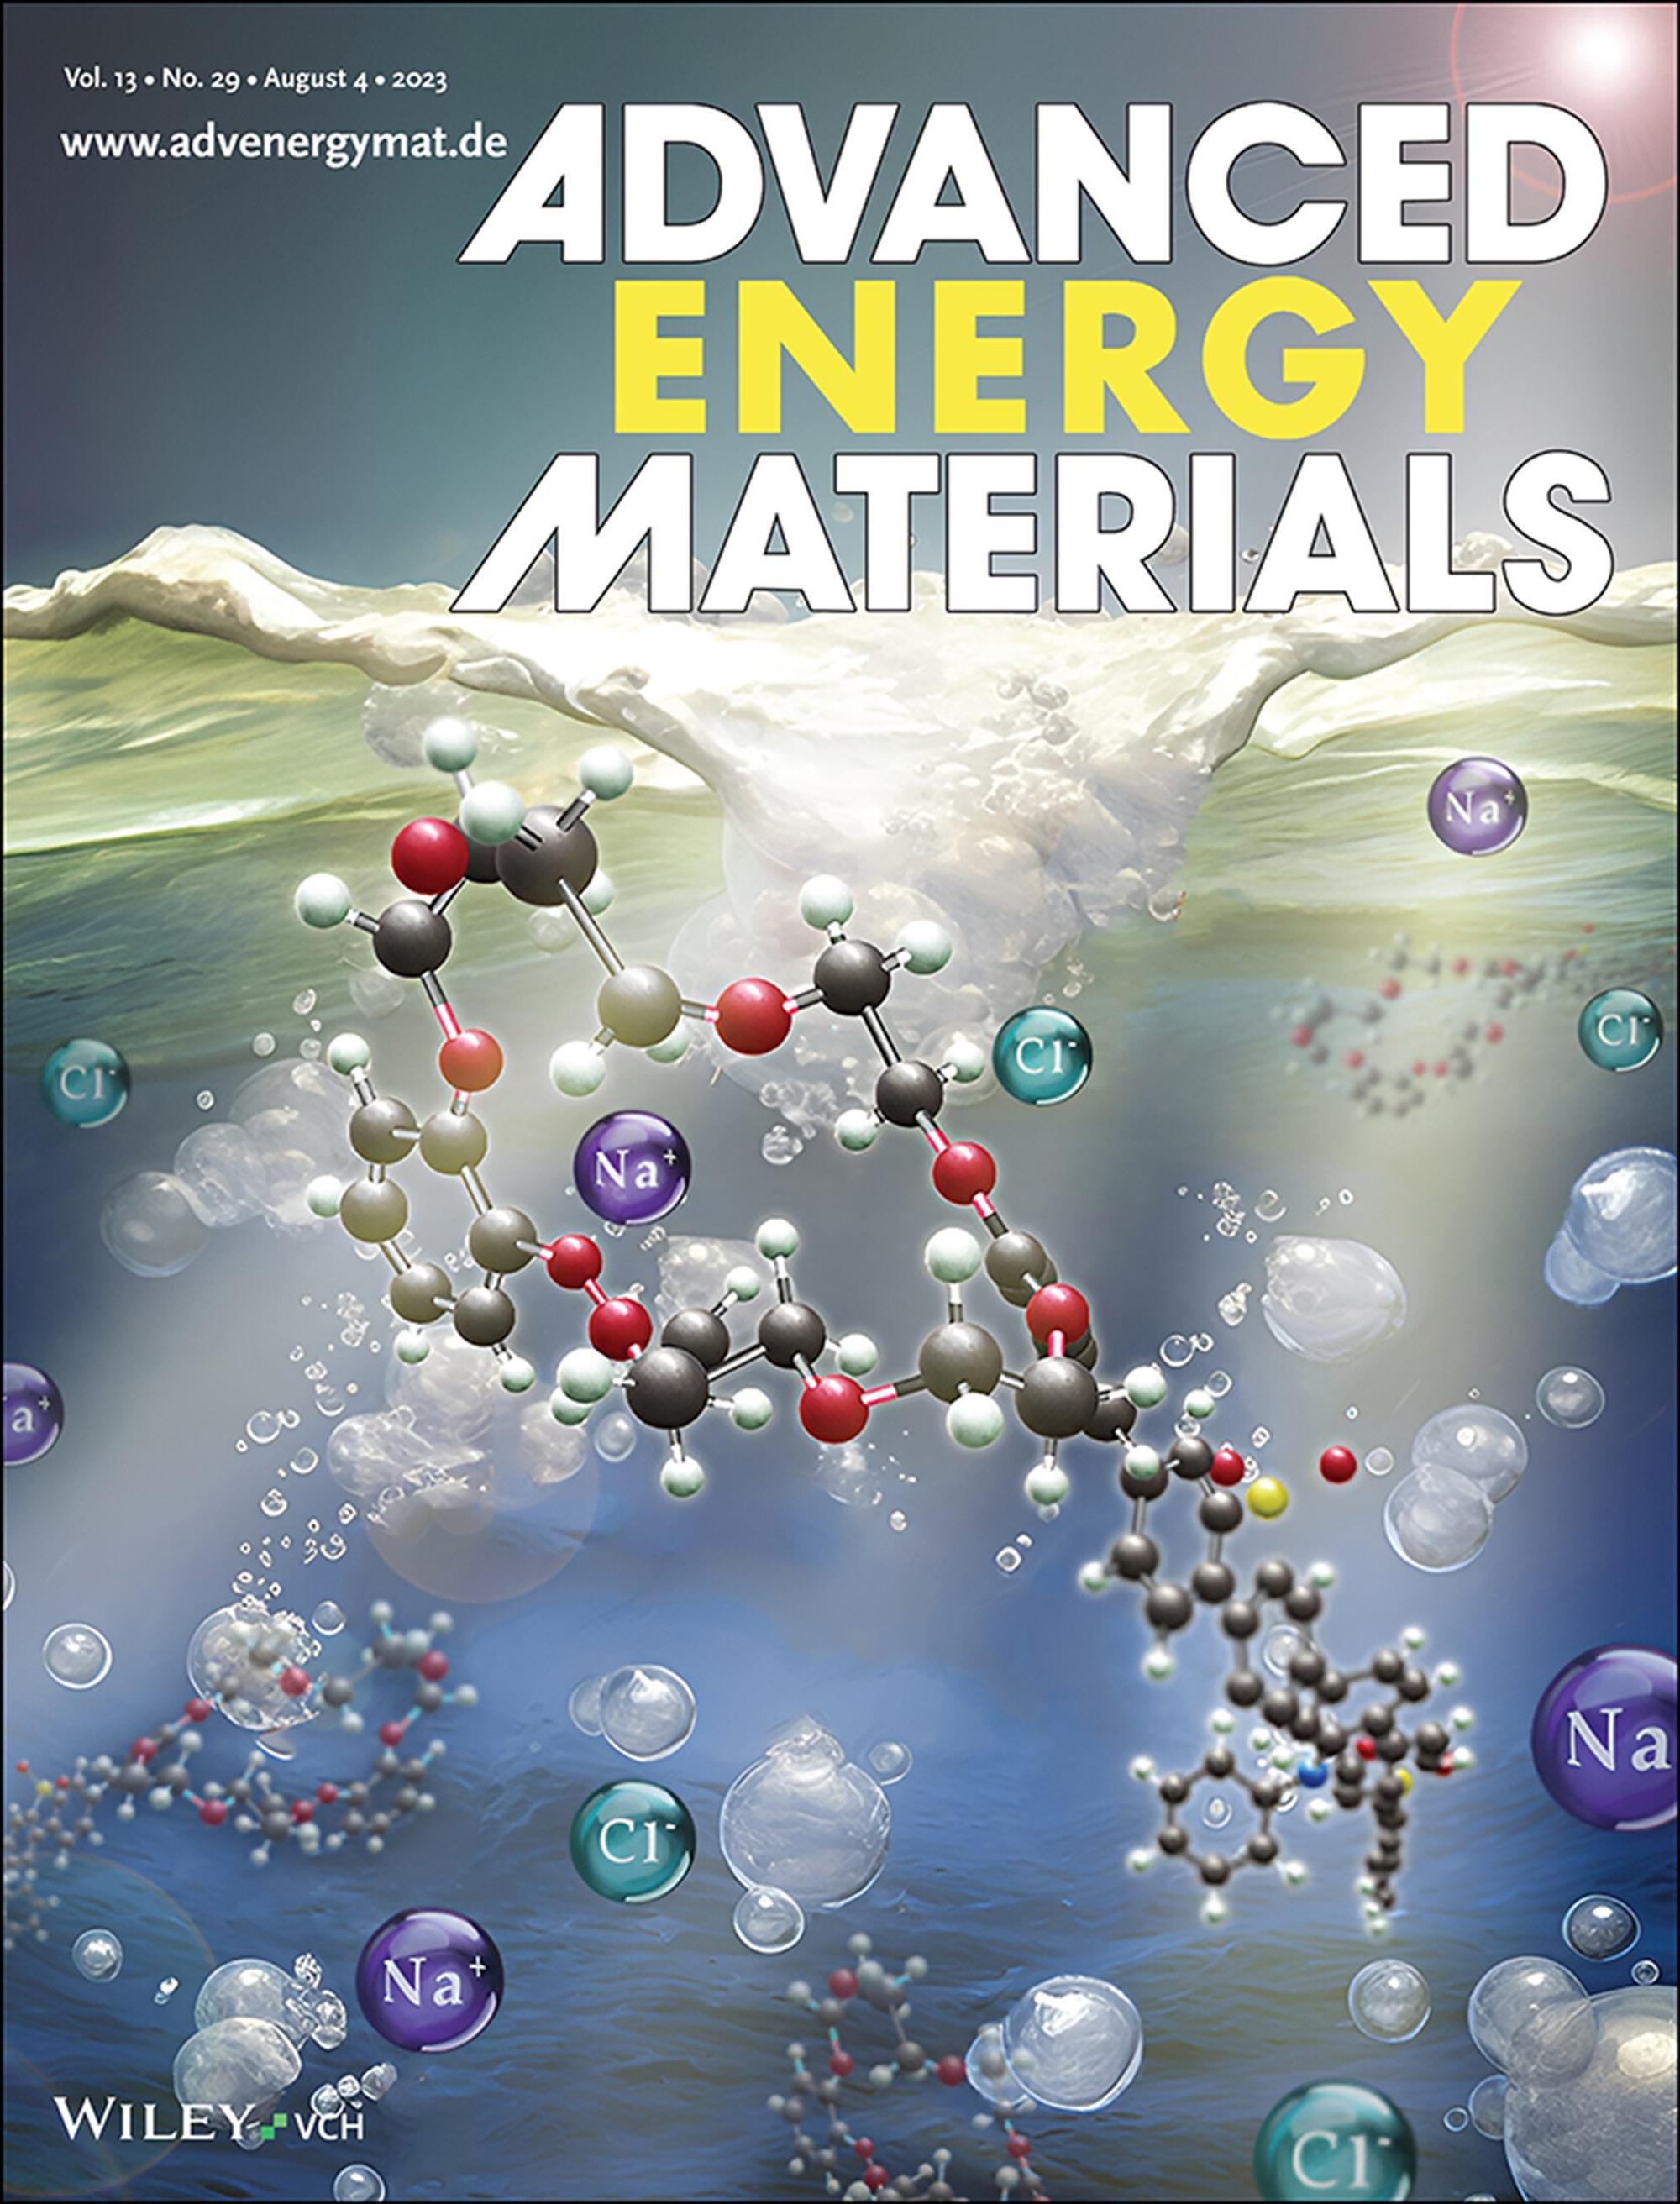 NTHU's seawater hydrogen production research findings are featured on the cover of the renowned journal Advanced Energy Materials.